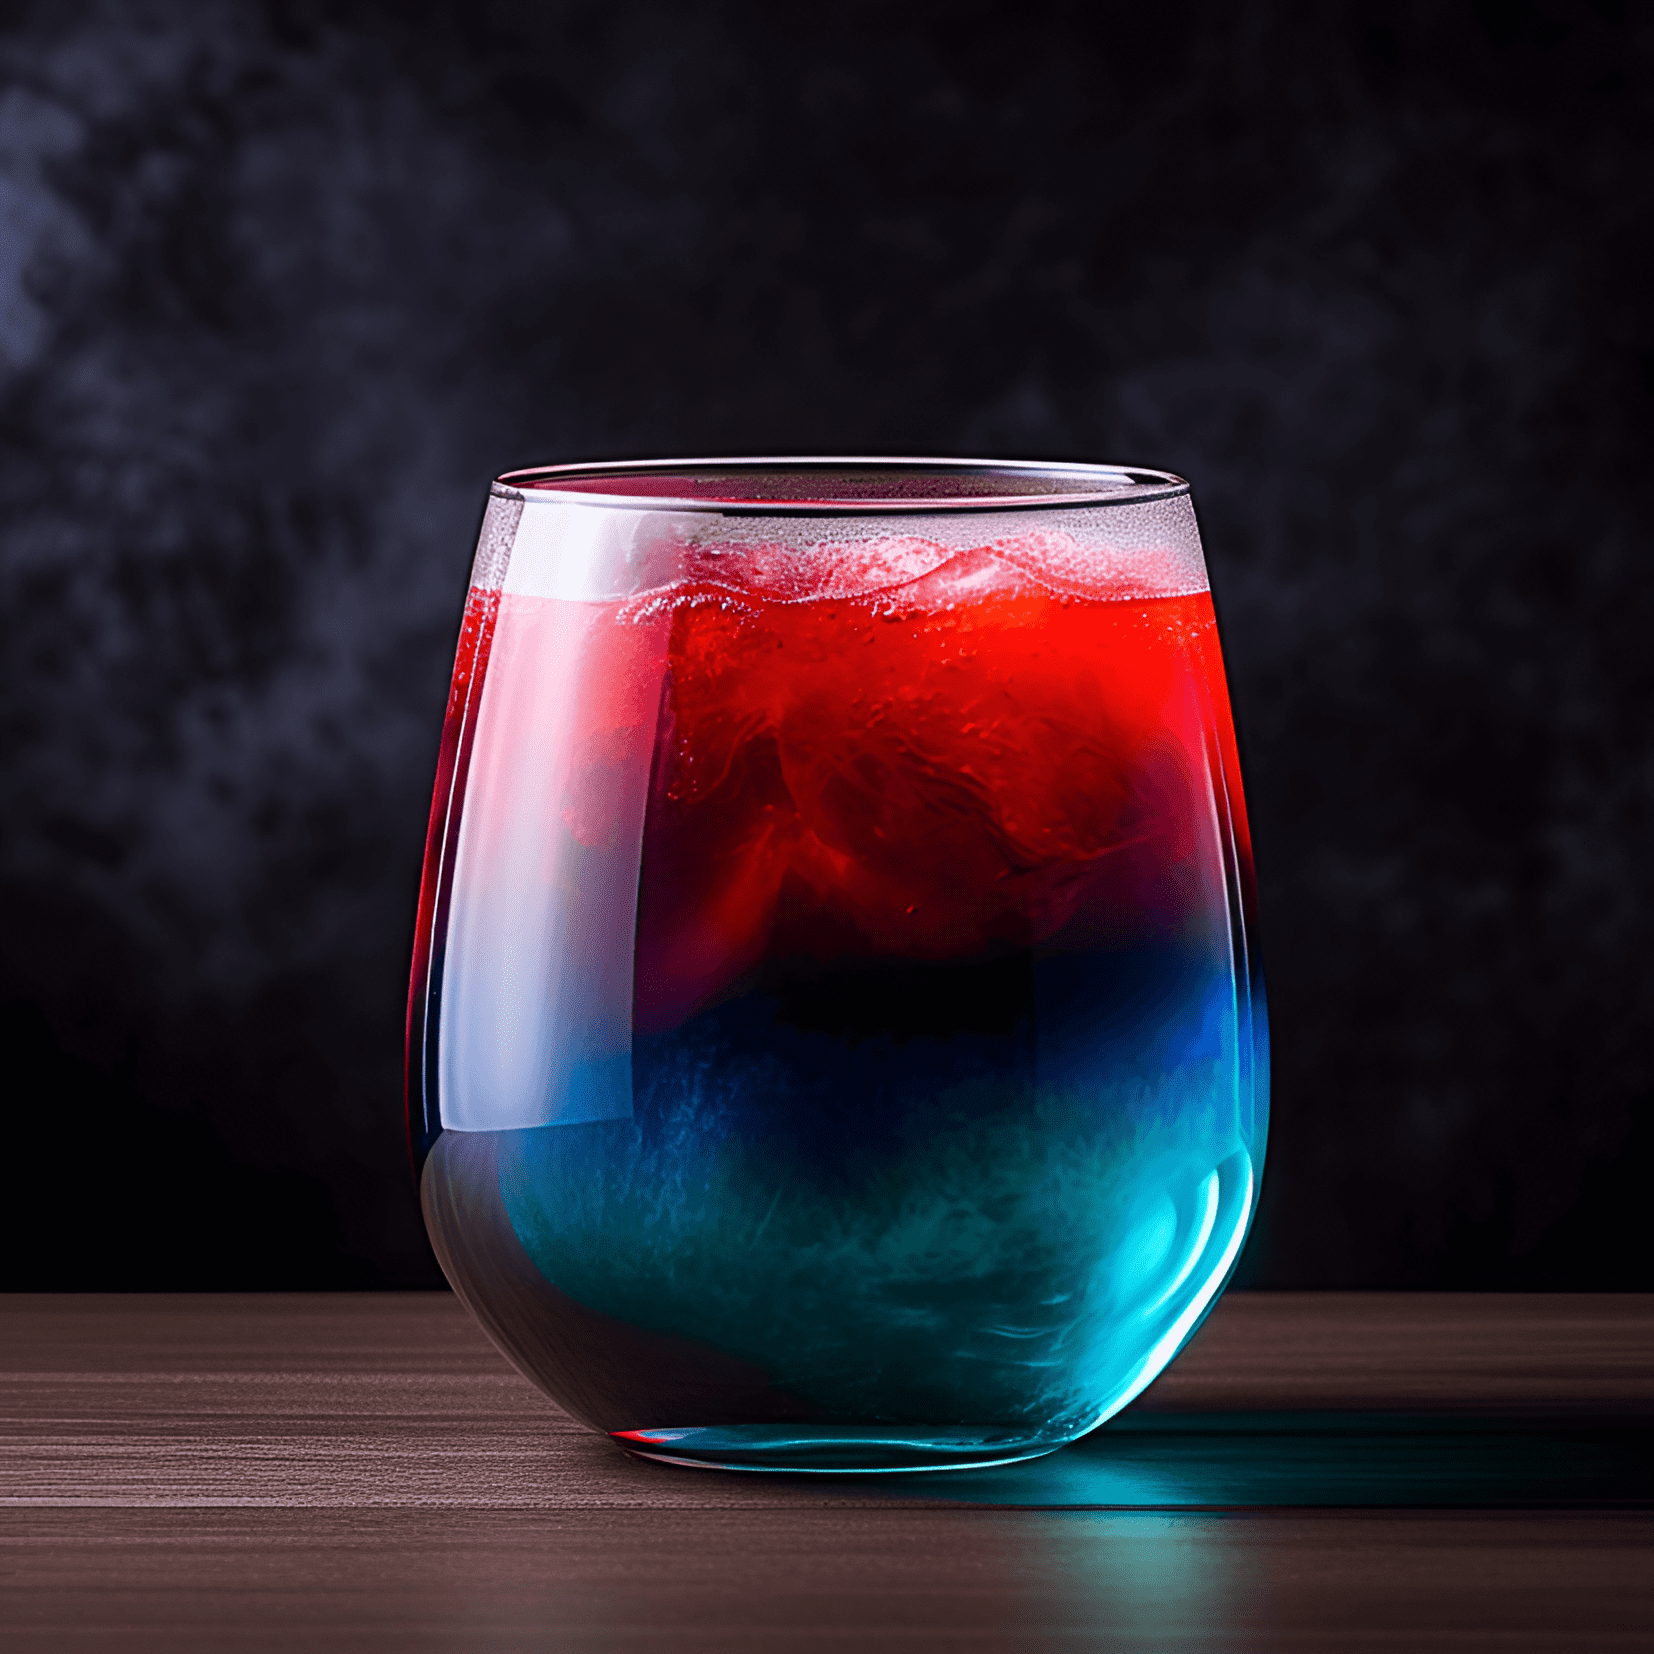 Aurora Jungle Juice Cocktail Recipe - The Aurora Jungle Juice has a sweet and fruity taste, with a hint of tartness from the lime. The combination of flavors creates a refreshing and well-balanced drink that is perfect for those who enjoy tropical and fruity cocktails.